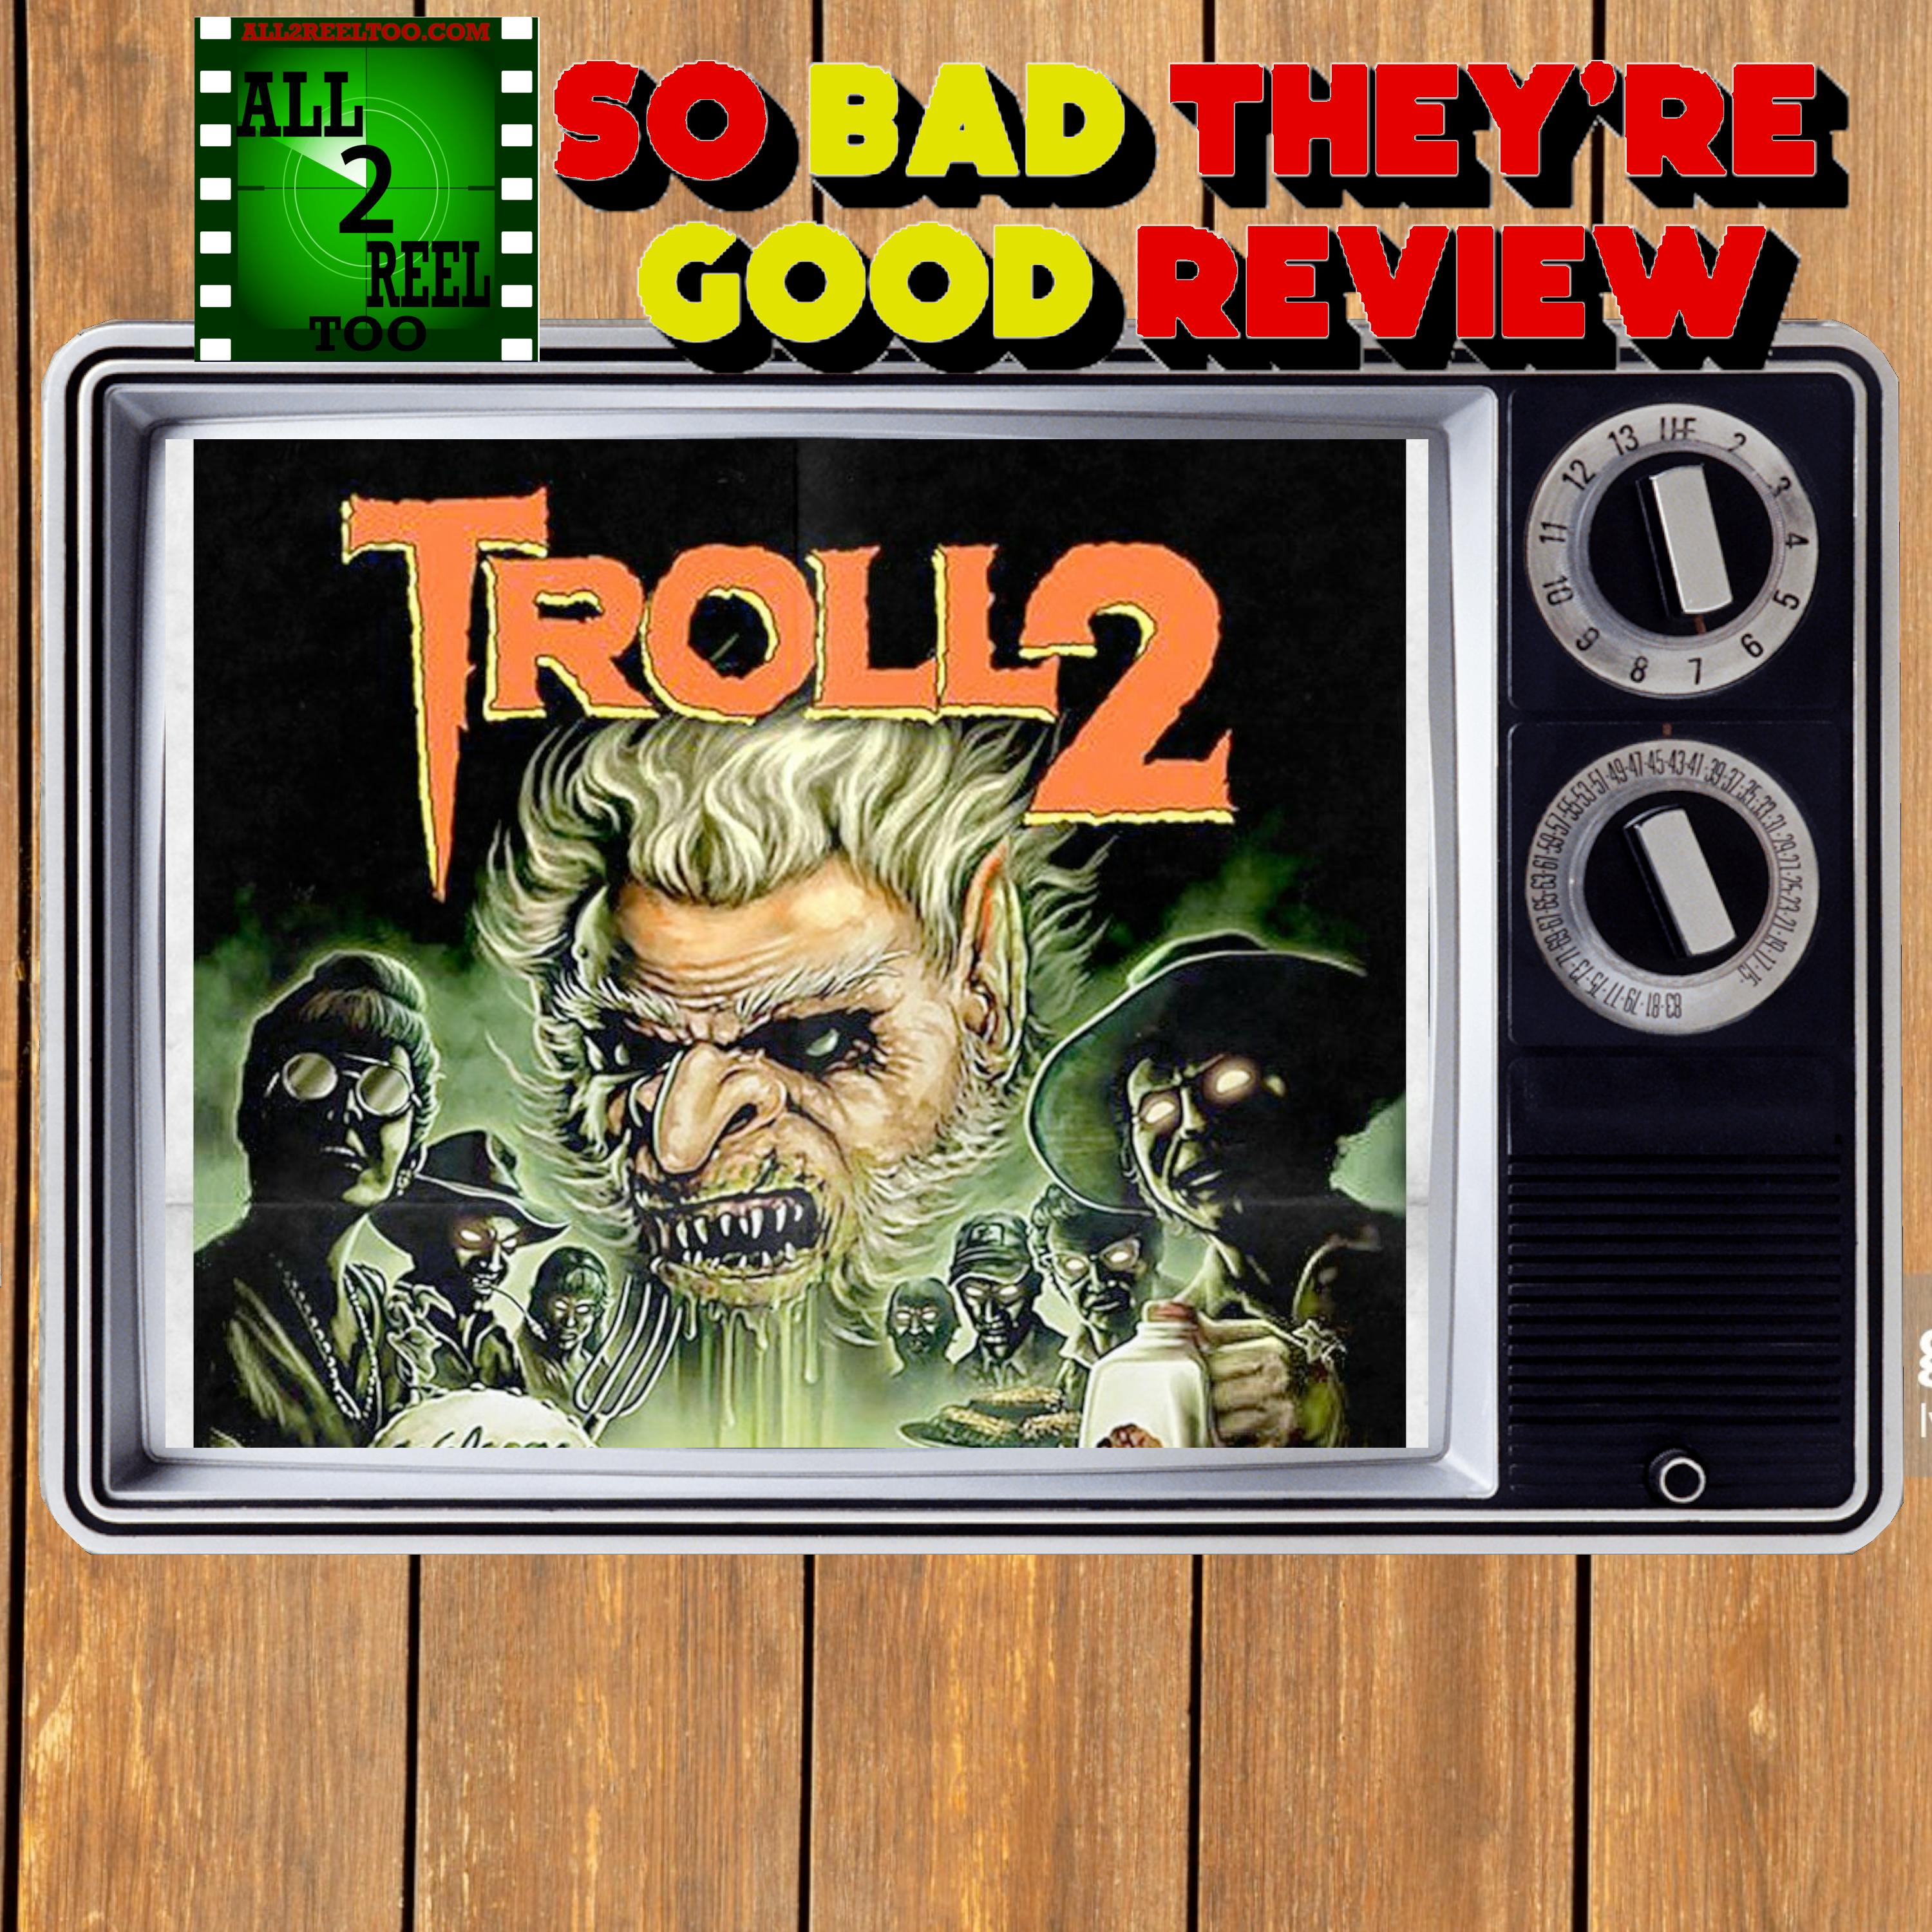 TROLL 2 (1990) - SO BAD THEY’RE GOOD REVIEW